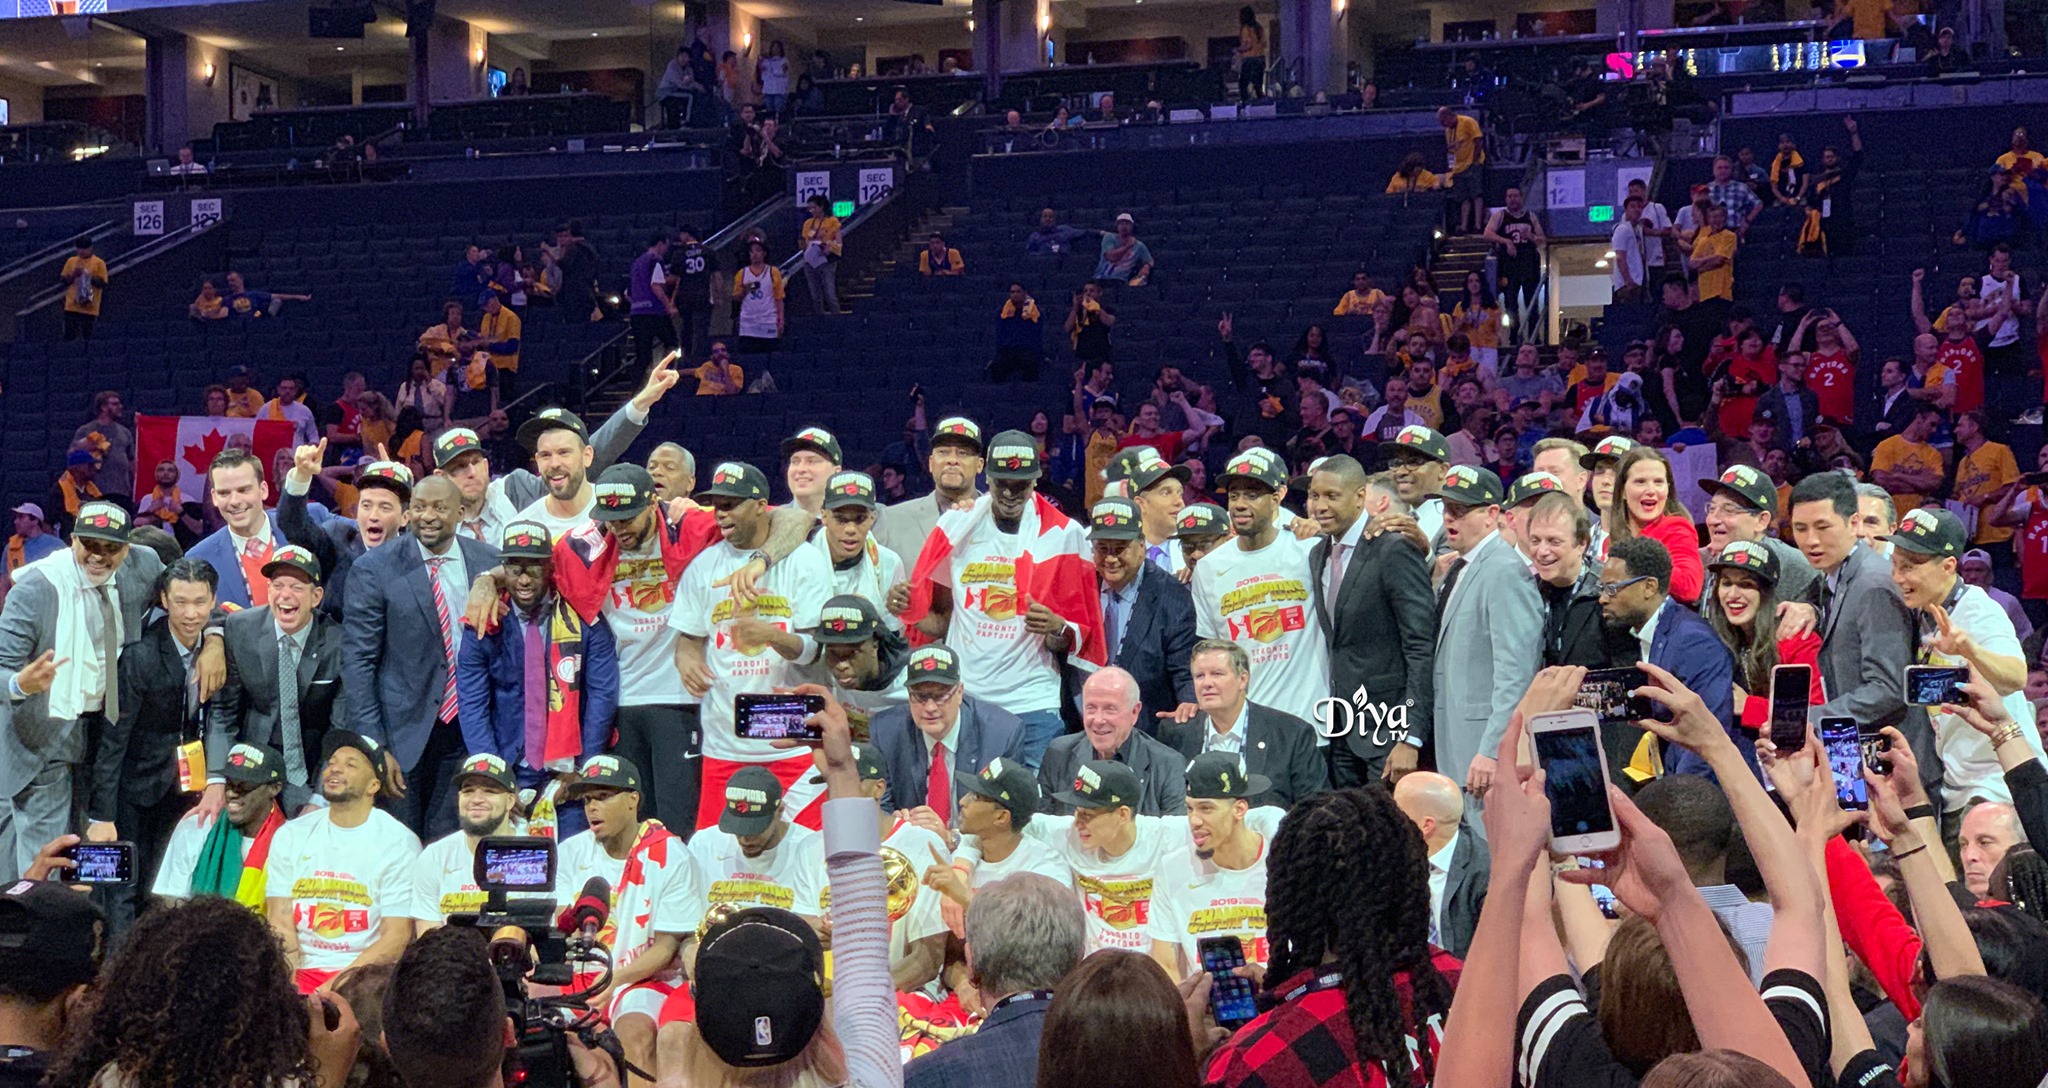 Raptors win first ever NBA championship over the Golden State Warriors